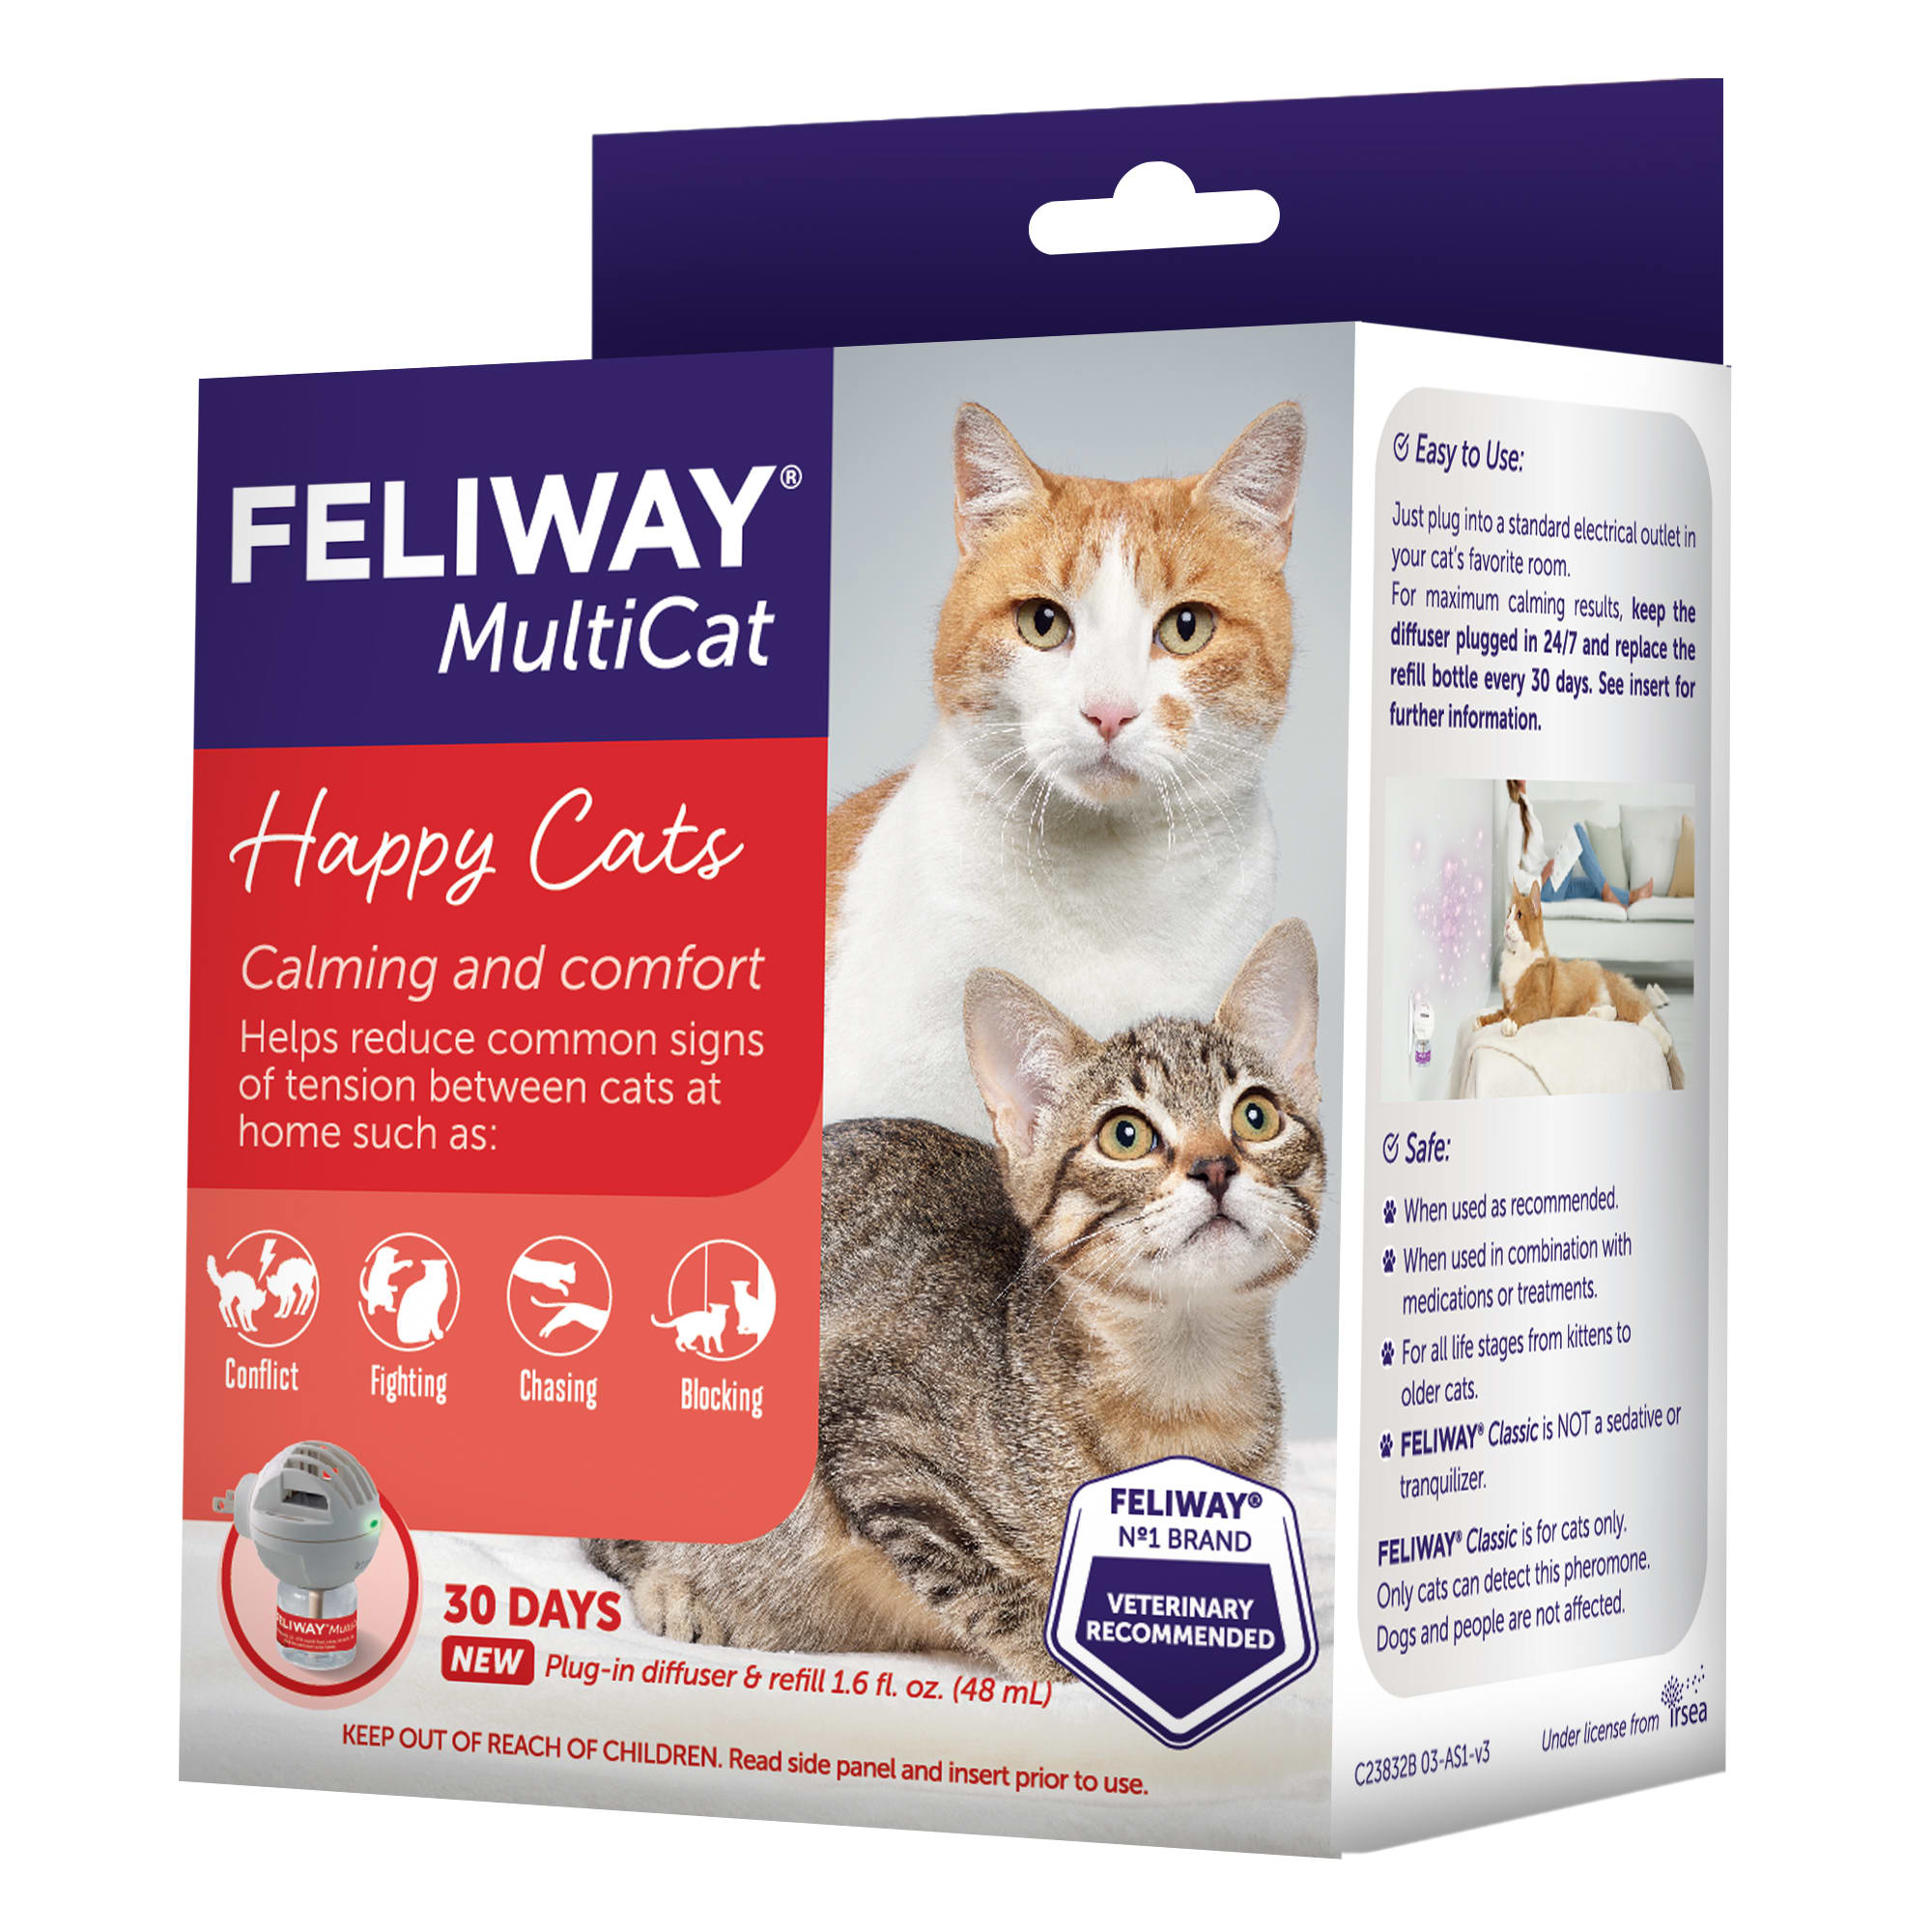 Feliway Friends Diffuser with Refill 48 ml